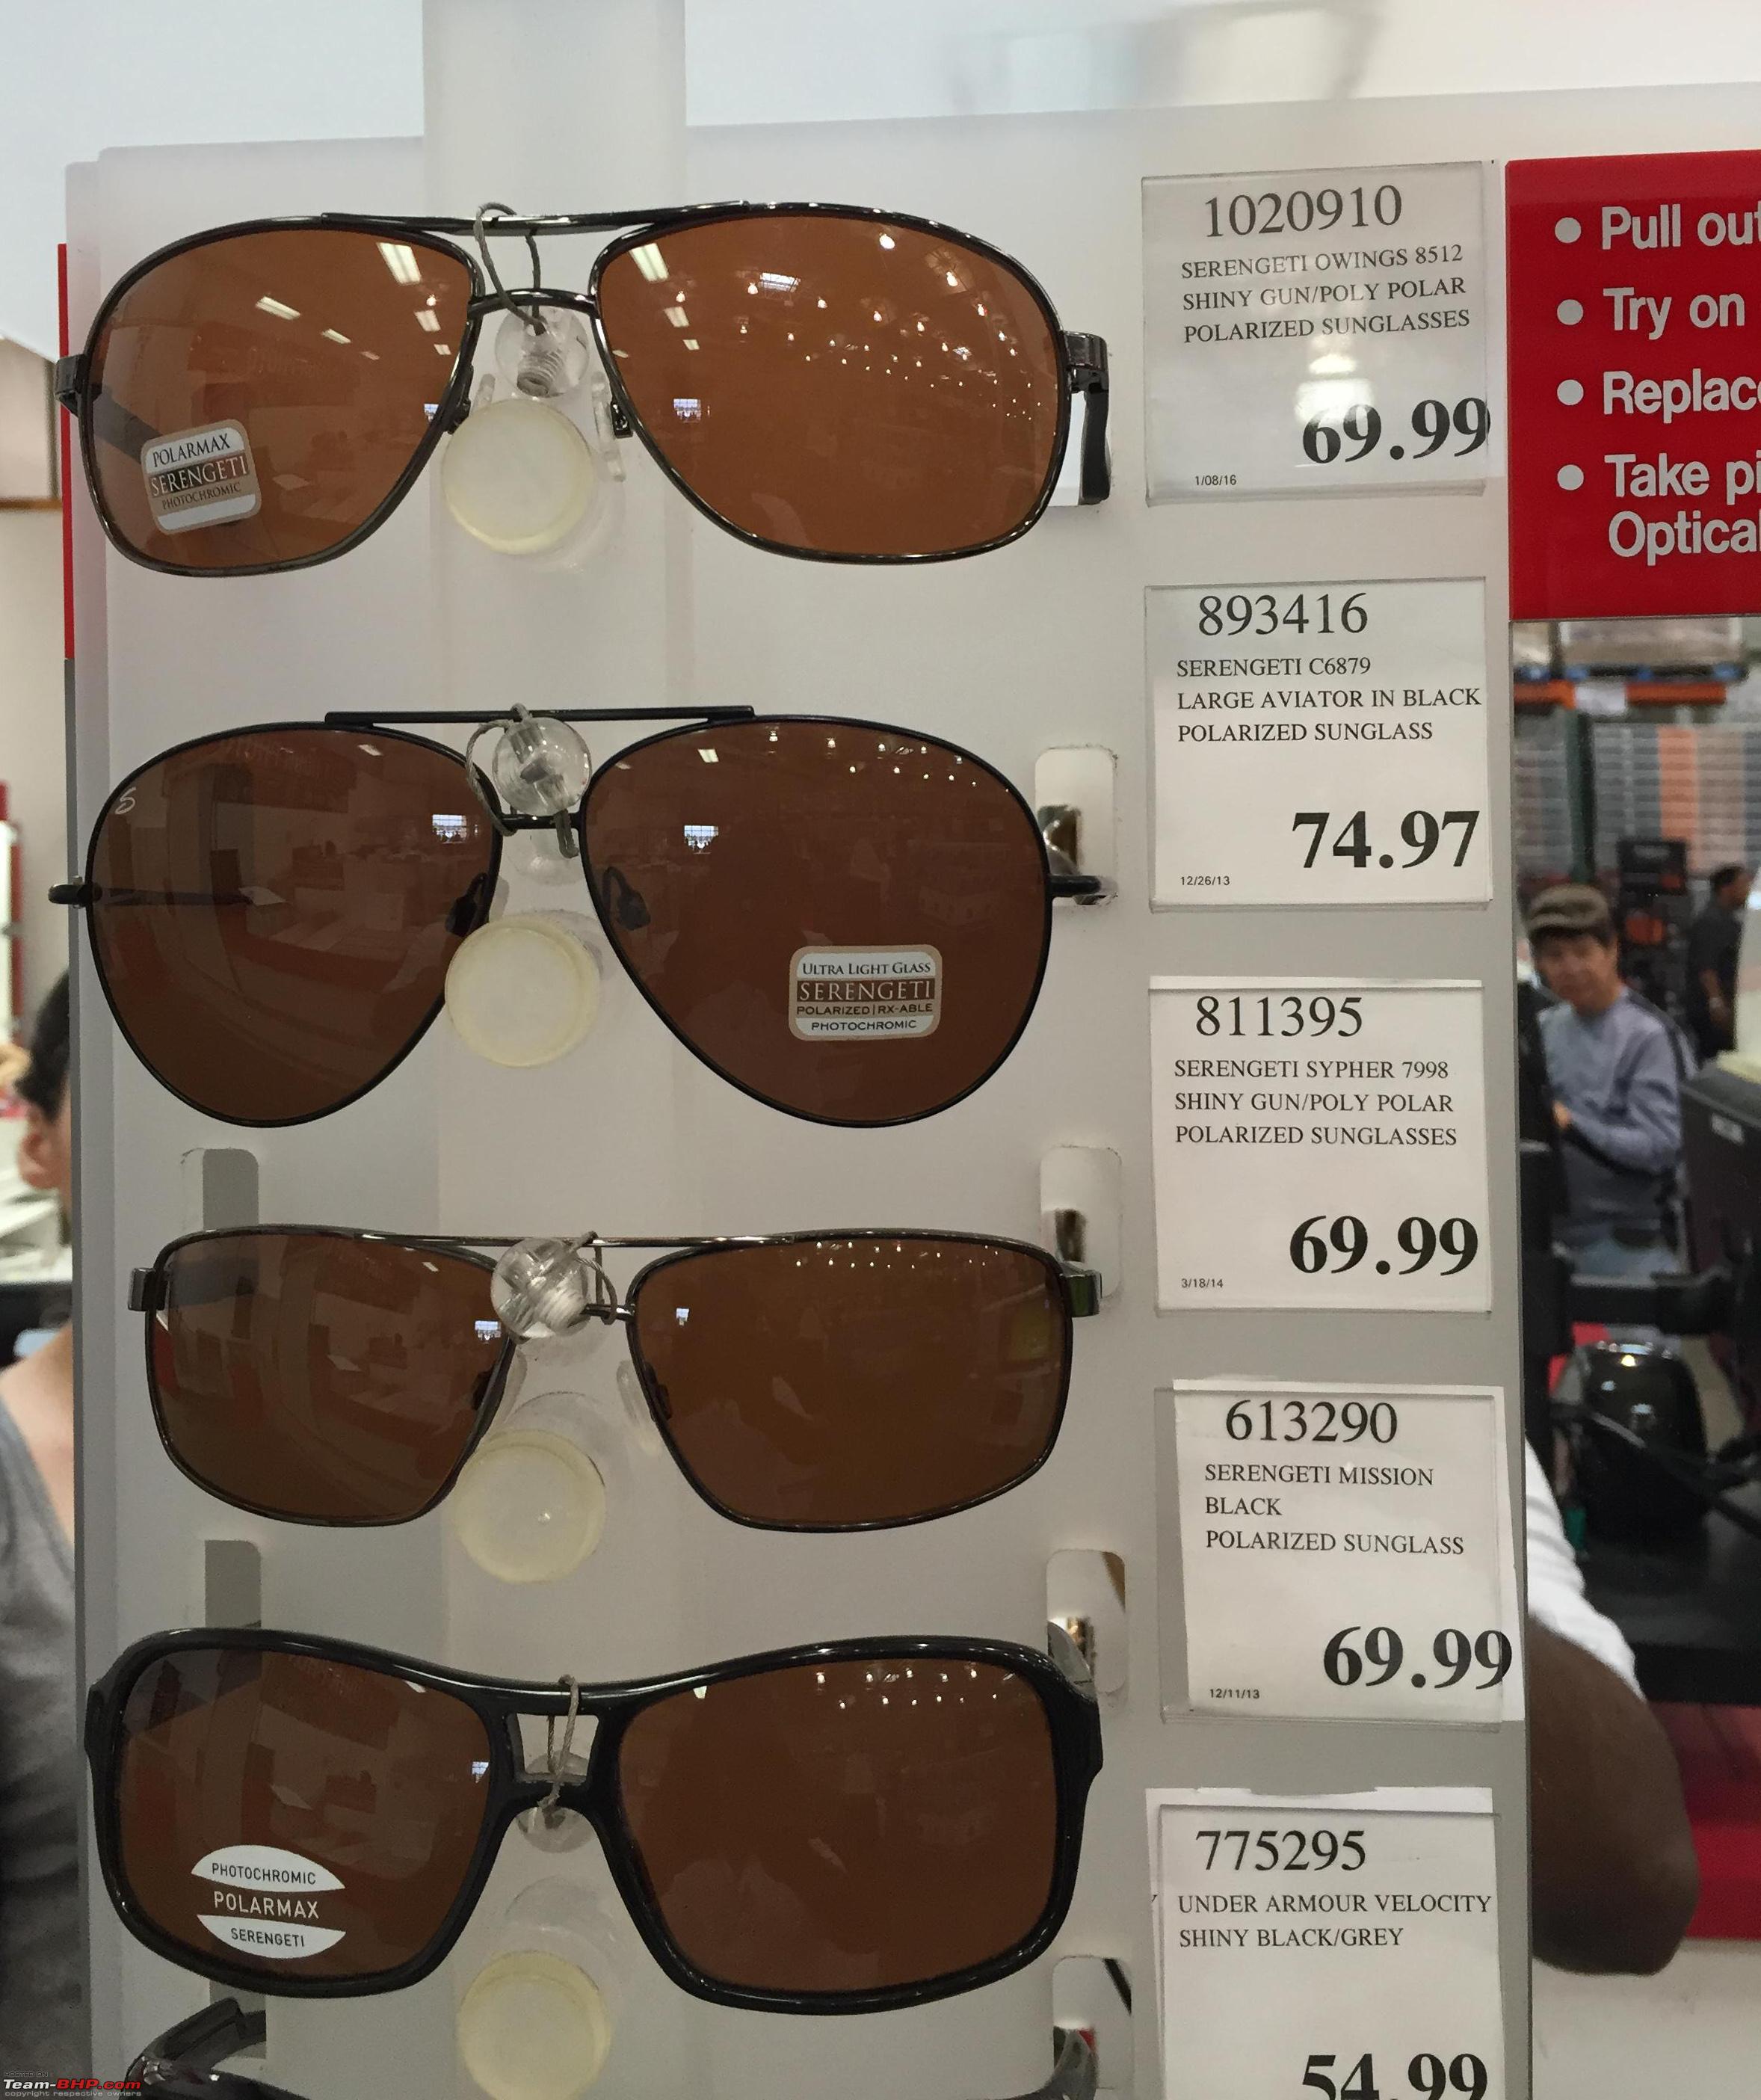 ray ban sunglasses price in csd canteen